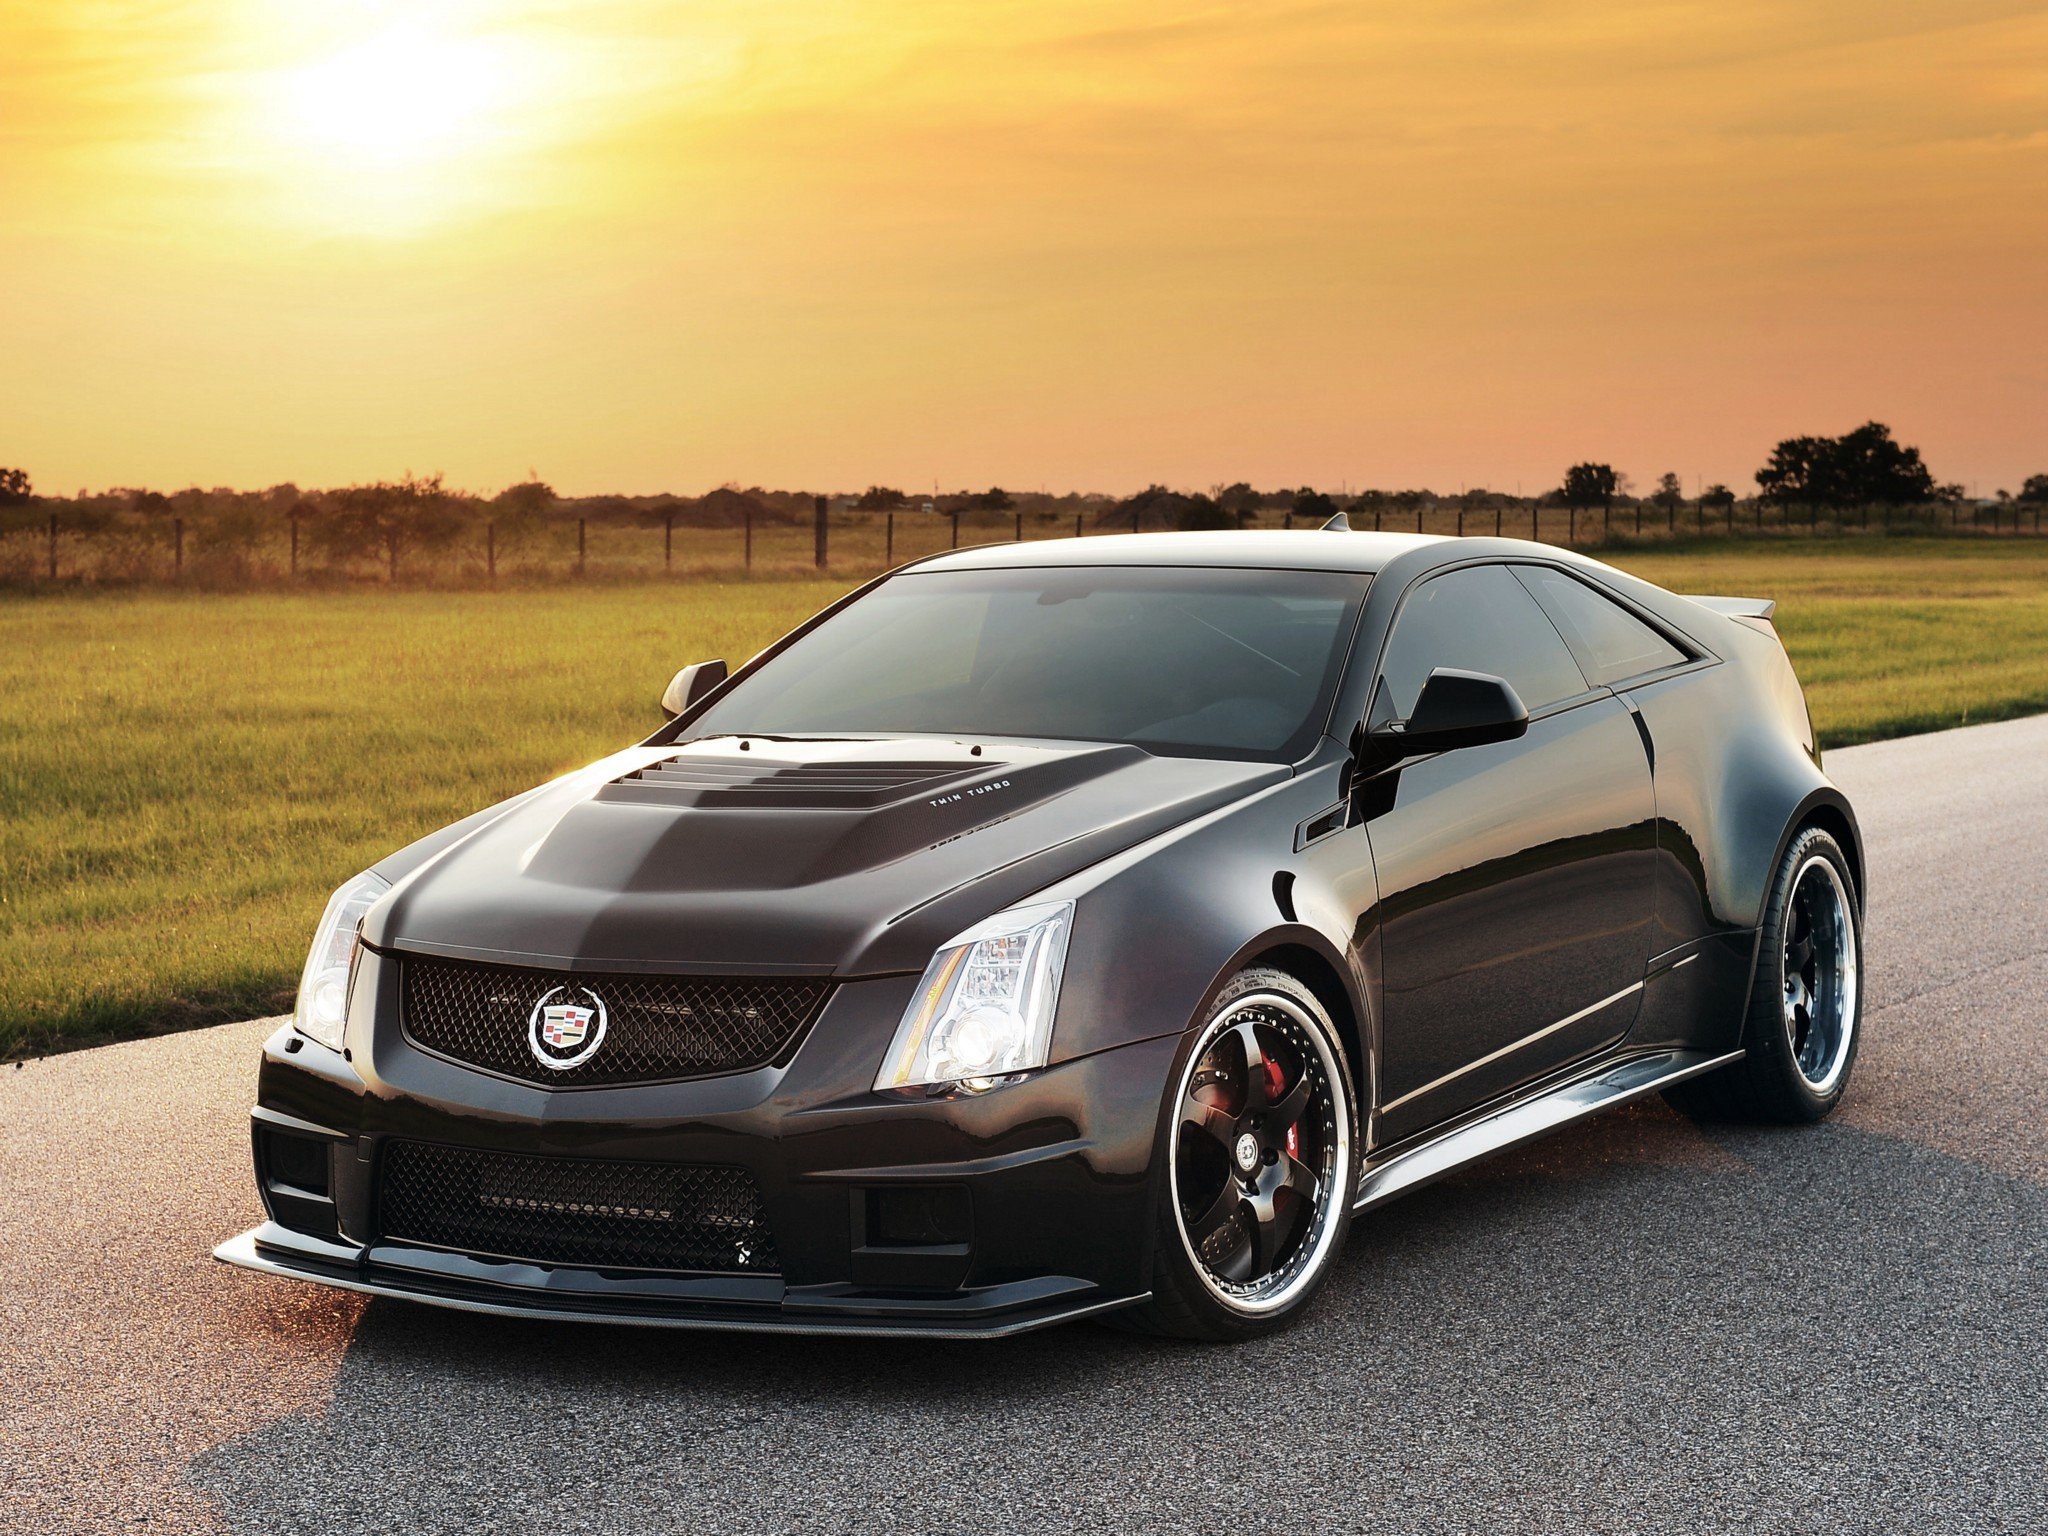 hennessey, Cadillac, Vr1200, Twin, Turbo, Coupe, 2012 Wallpaper